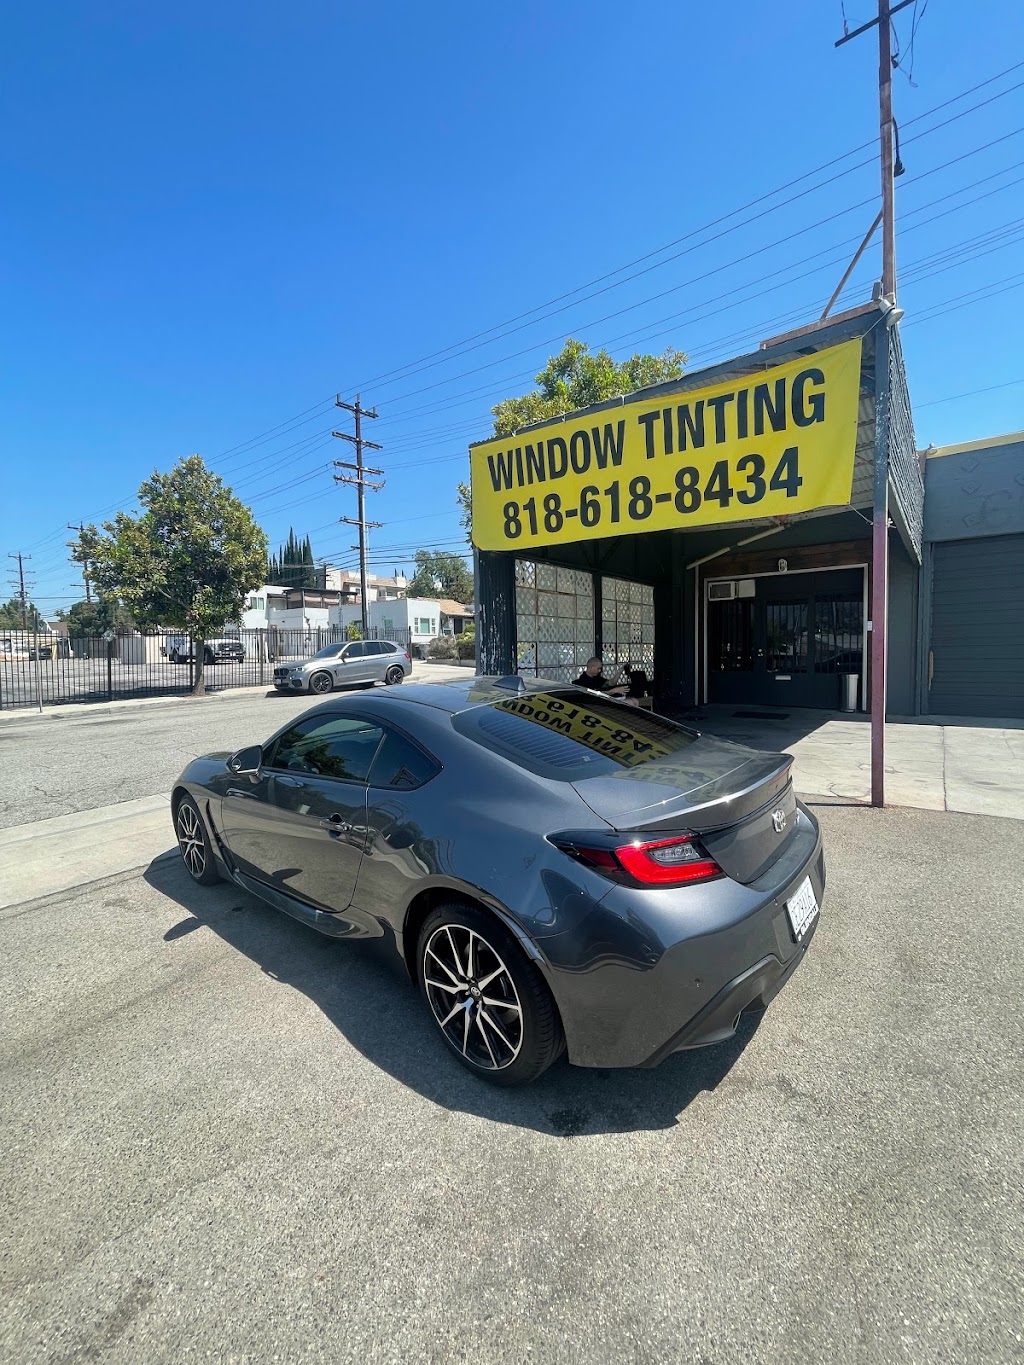 TintPlus - Auto, Commercial And Residential Window Tinting | 17205 Sierra Hwy Unit 104, Santa Clarita, CA 91351, USA | Phone: (818) 618-8434